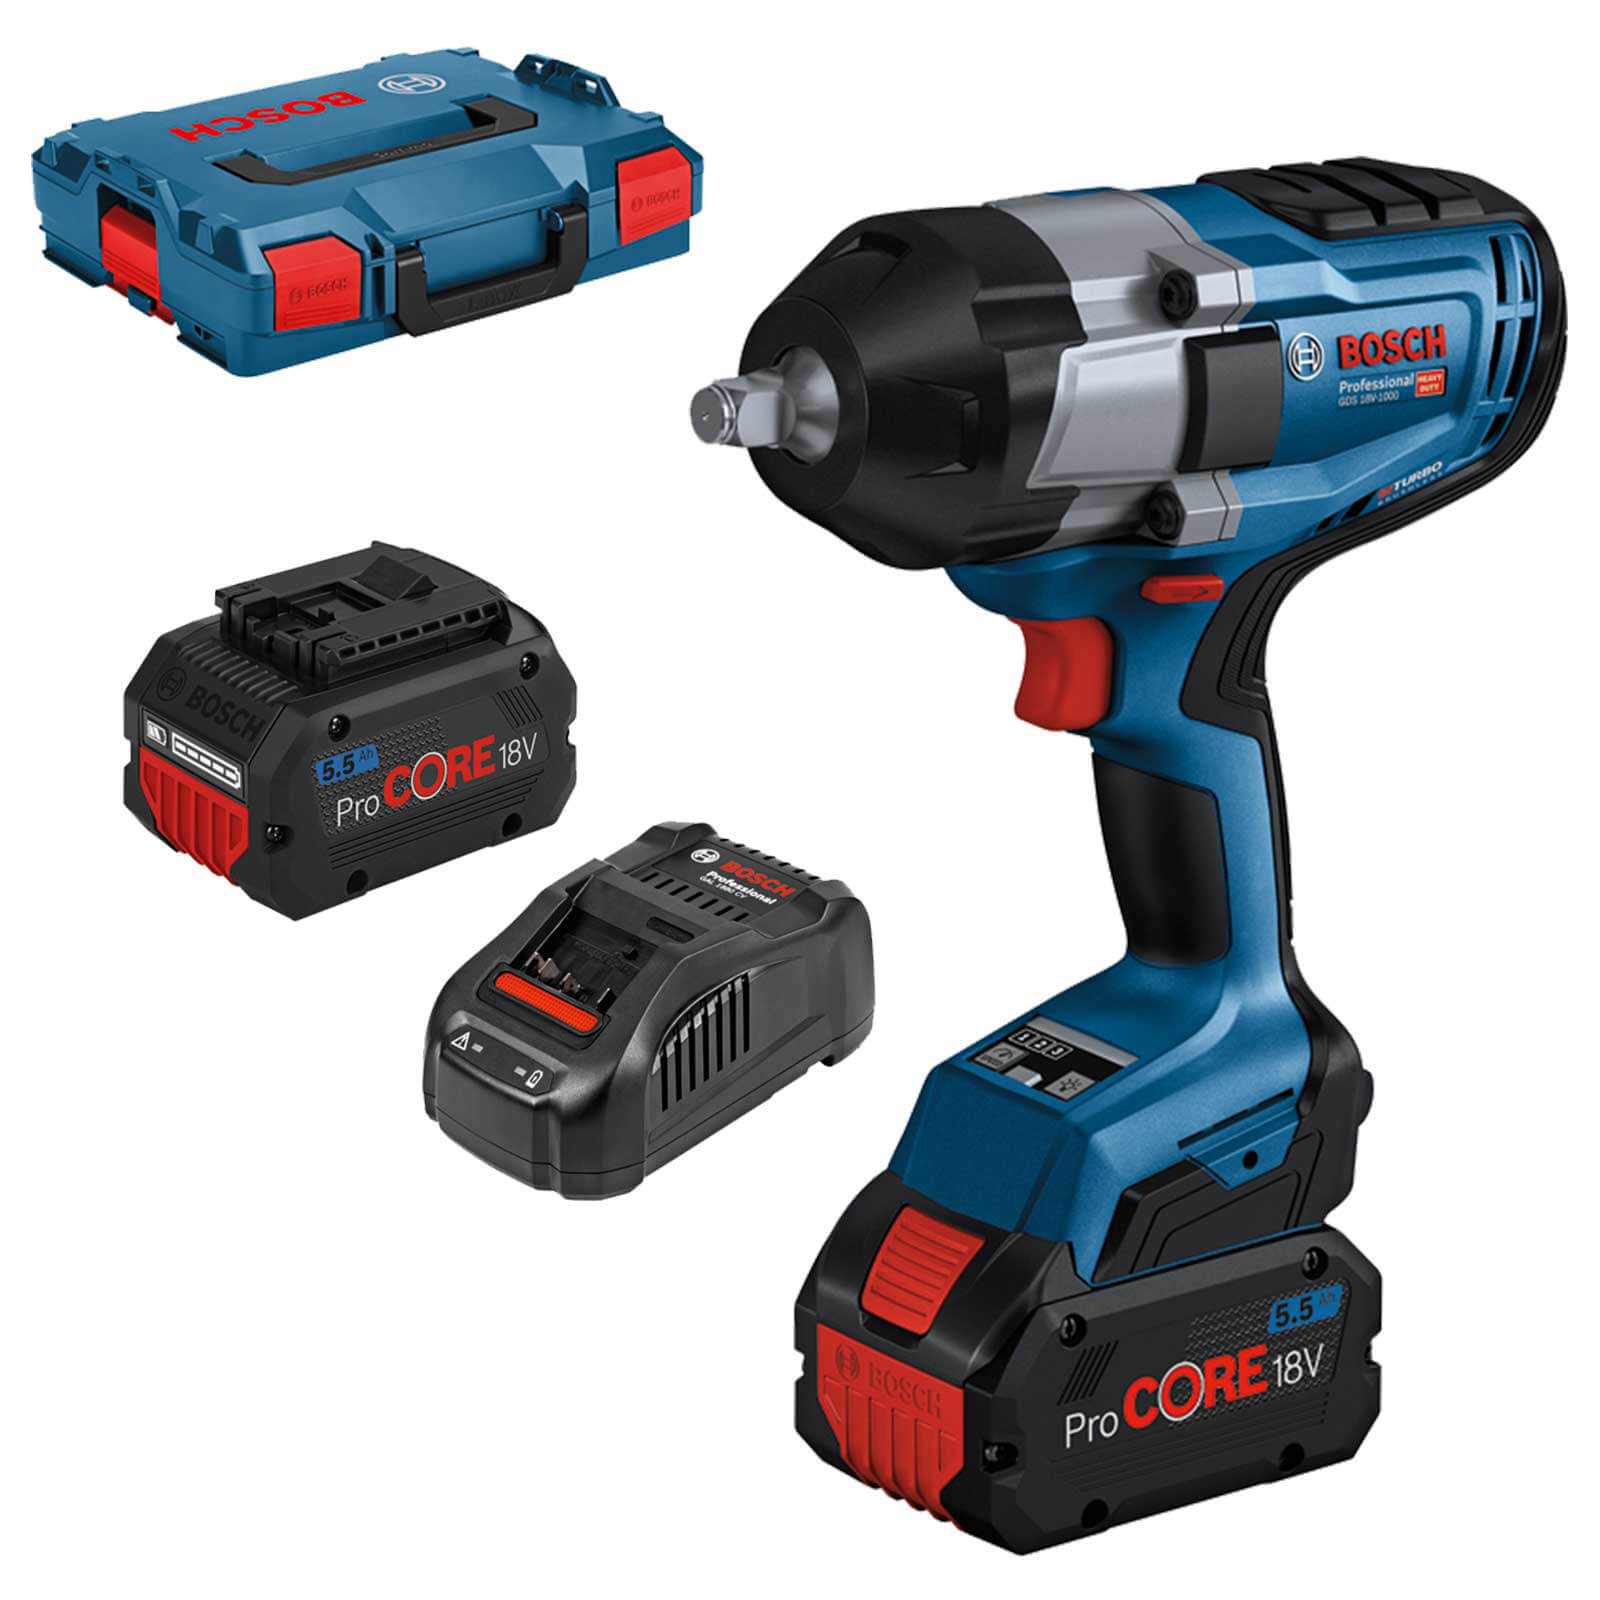 Photo of Bosch Gds 18v-1000 Biturbo 18v Cordless Brushless High Torque ½” Drive Impact Wrench 2 X 5.5ah Li-ion Charger Case